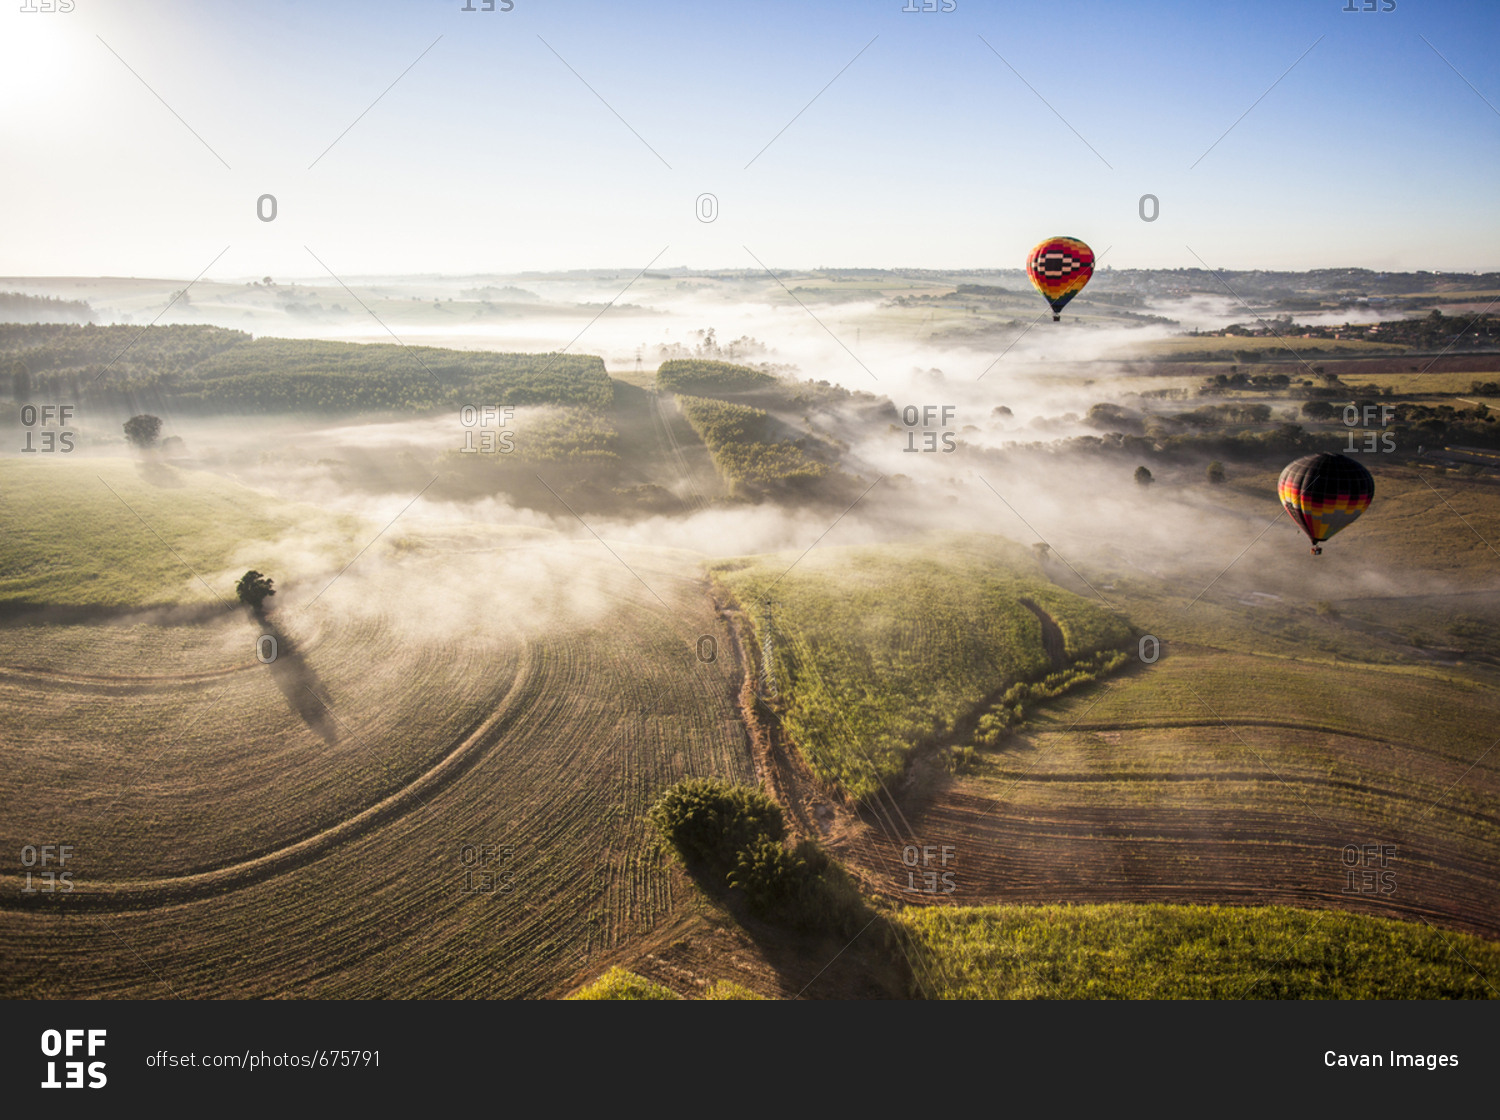 Aerial view of hot air balloons flying over landscape against sky during sunny day